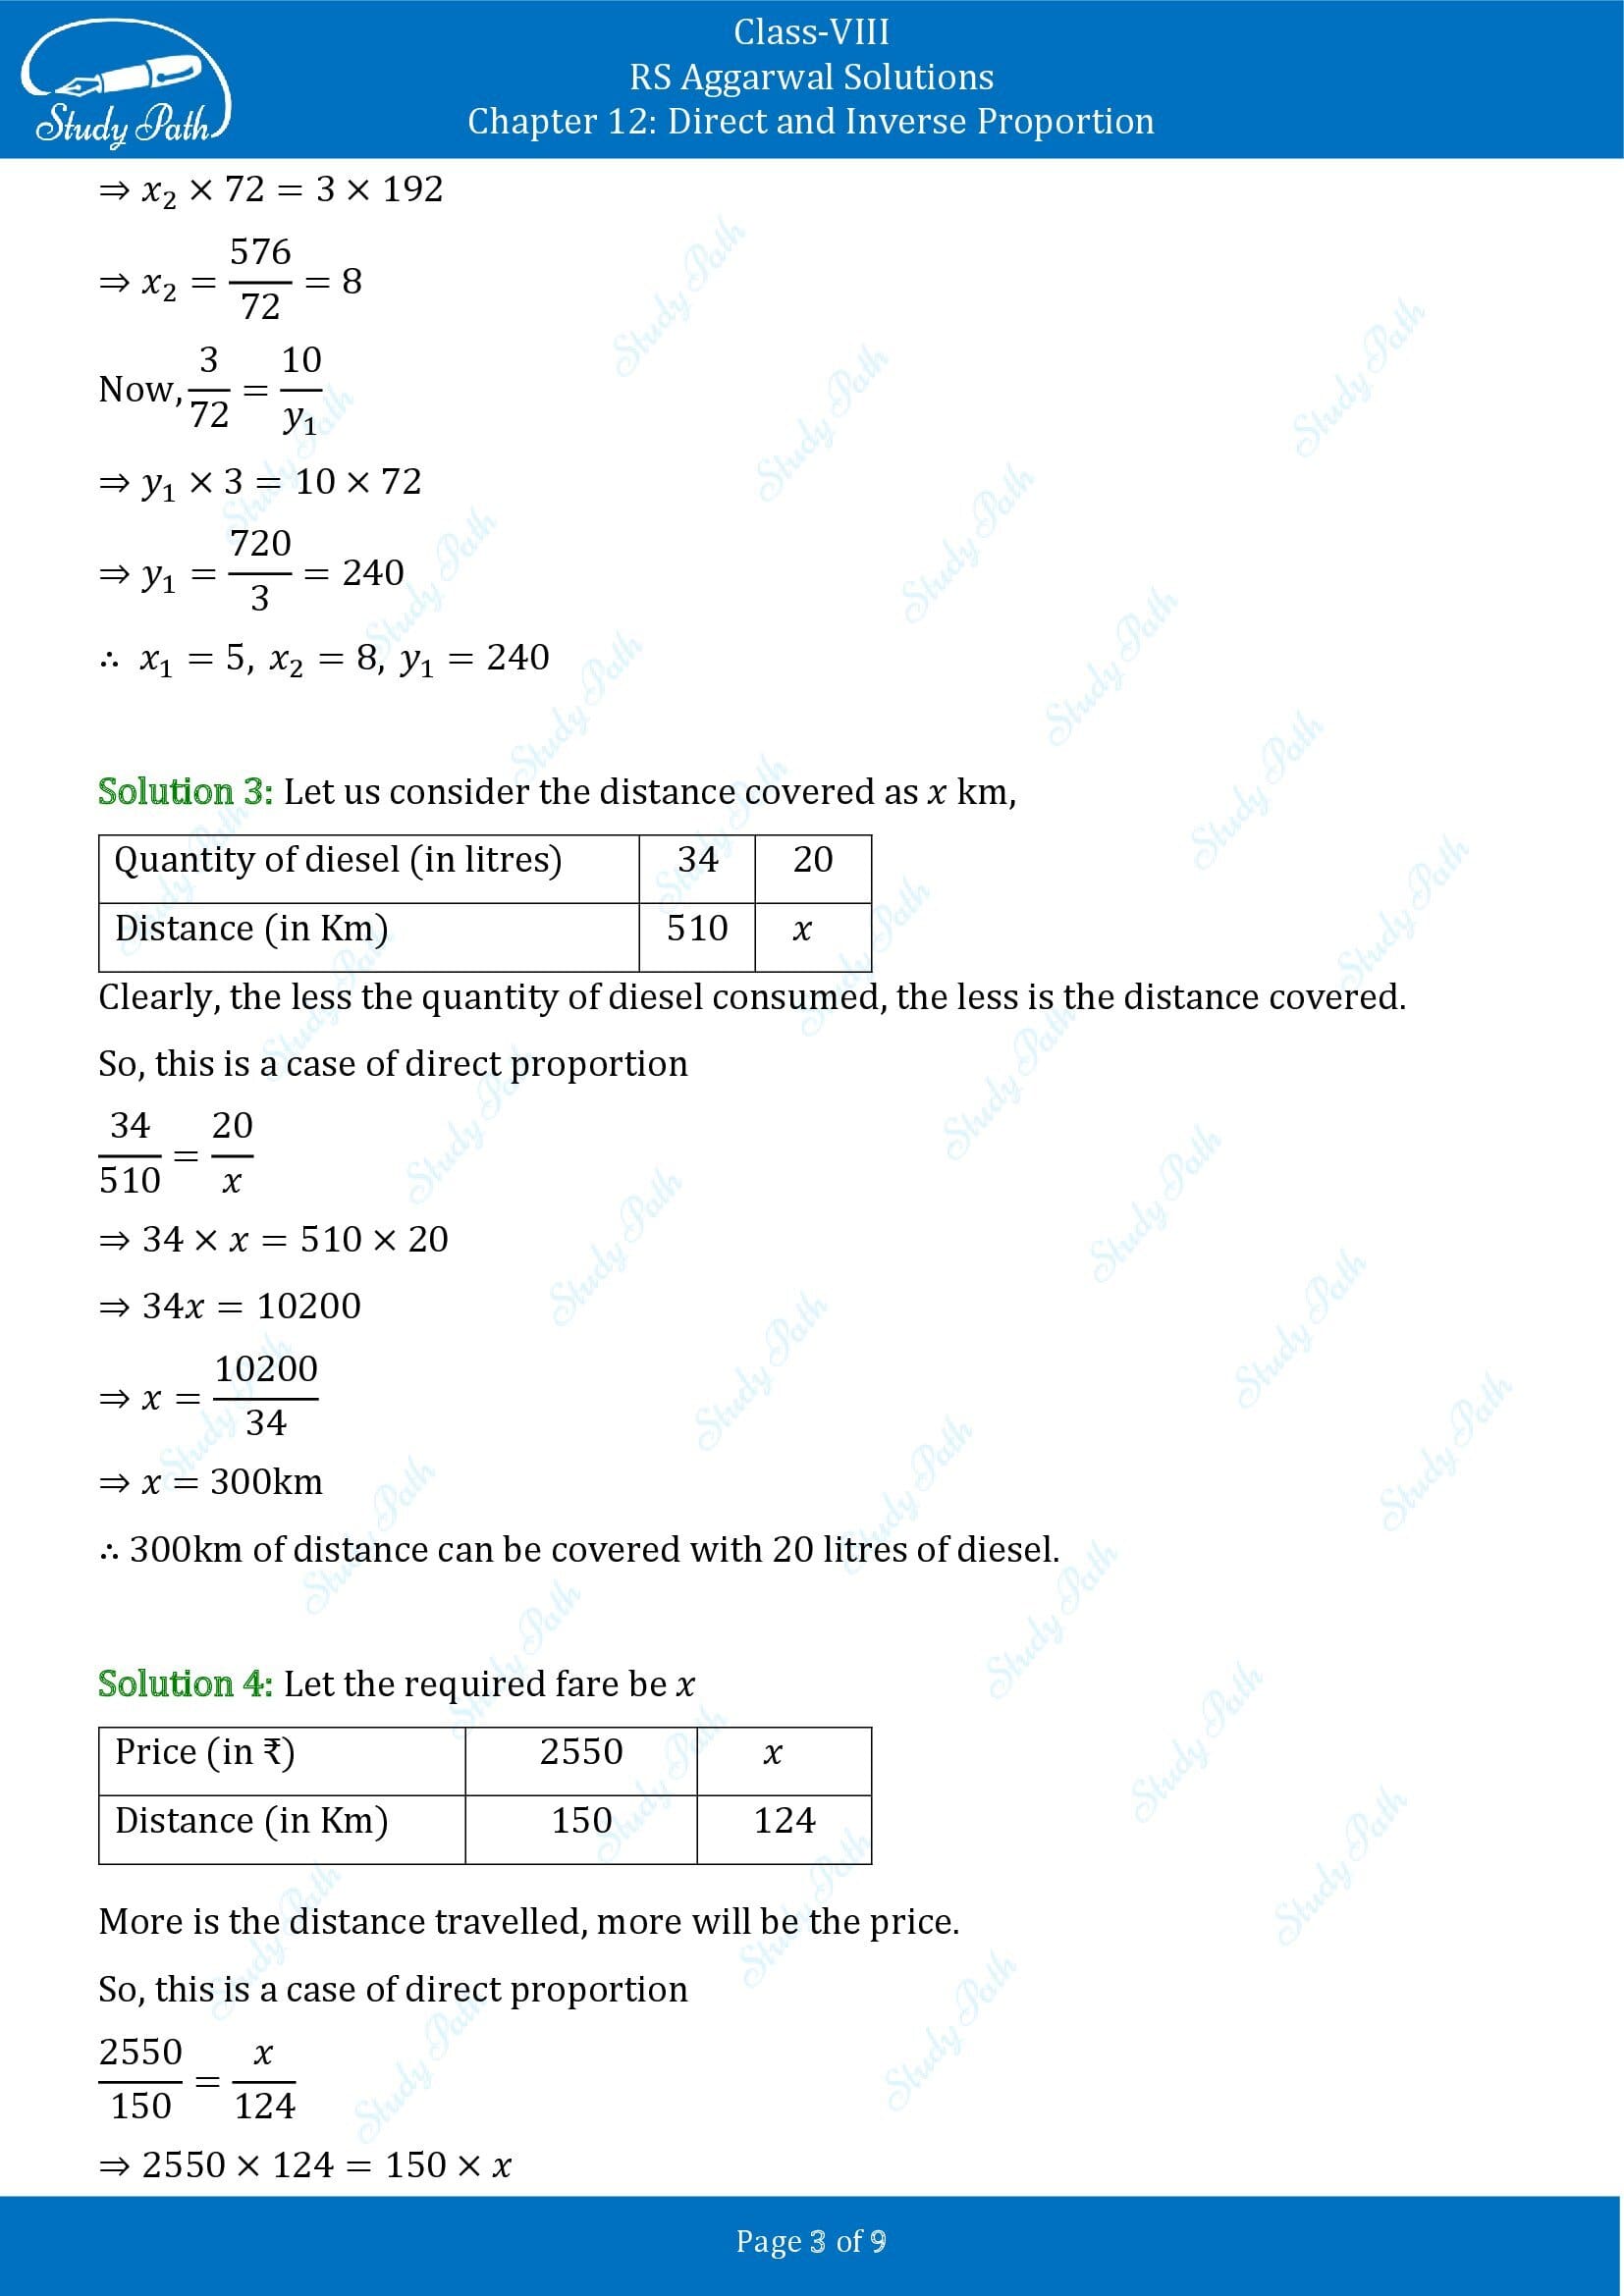 RS Aggarwal Solutions Class 8 Chapter 12 Direct and Inverse Proportion Exercise 12A 00003